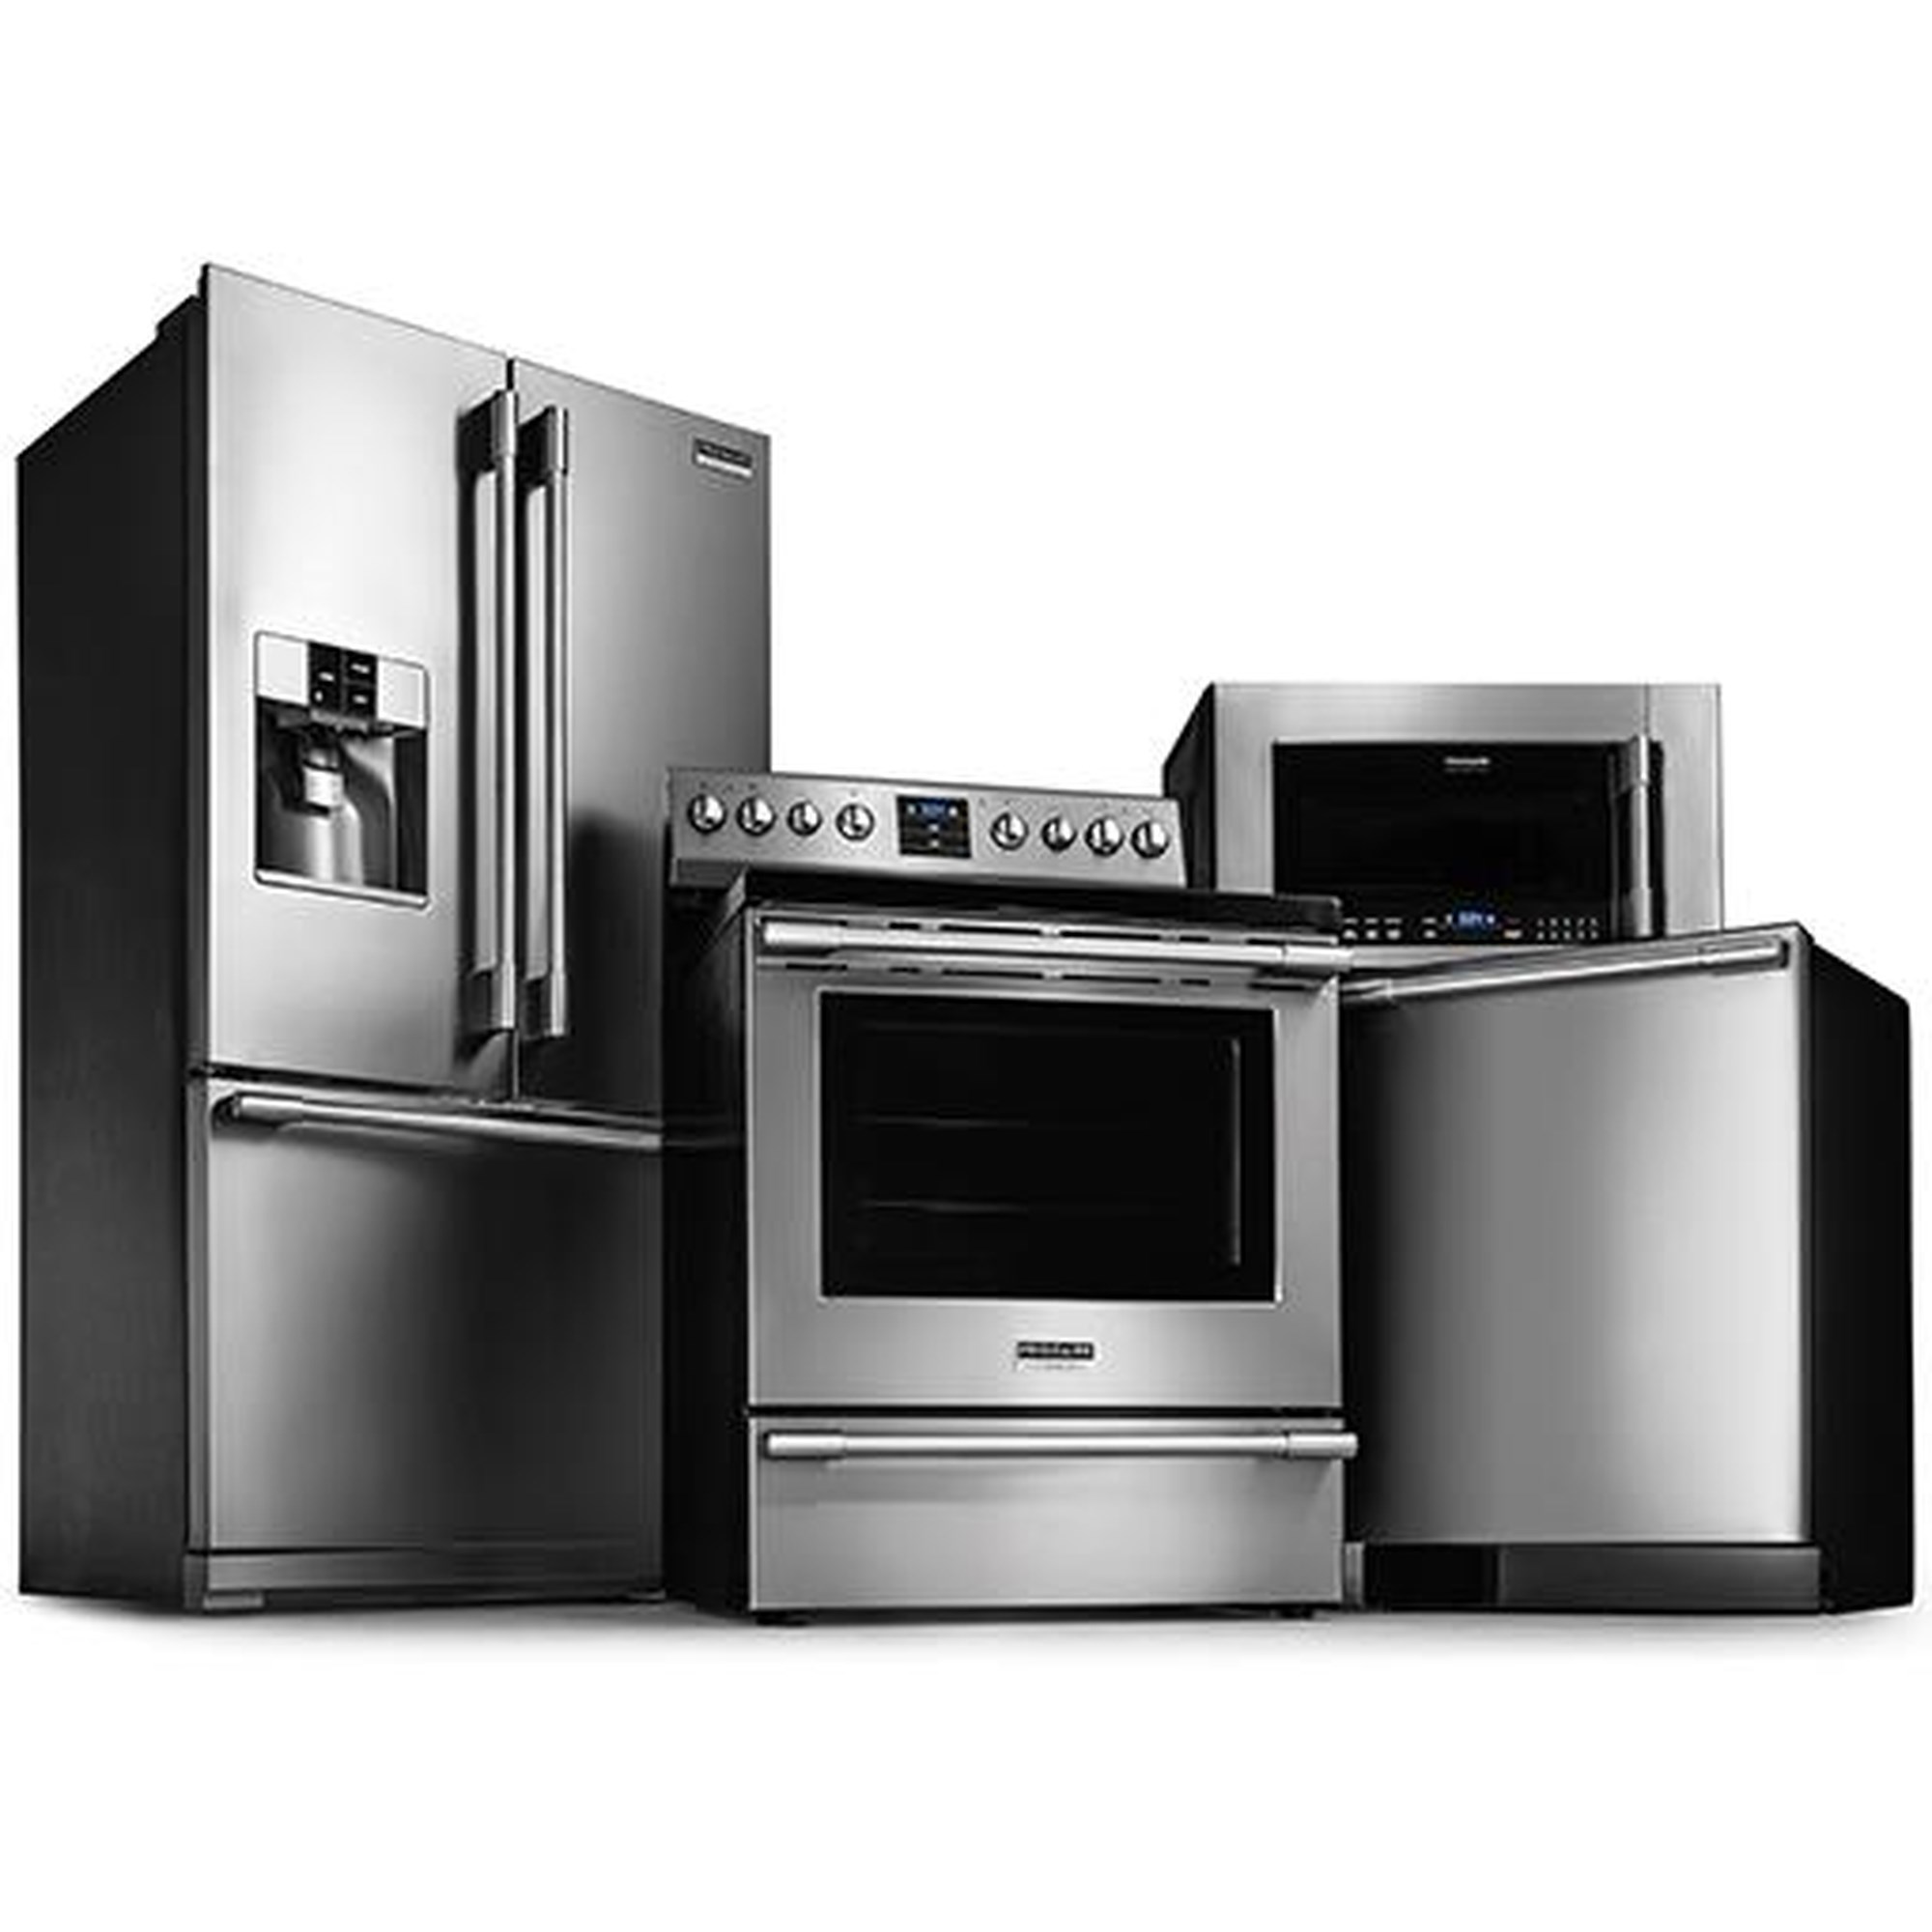 https://imageresizer4.furnituredealer.net/img/remote/images.furnituredealer.net/img/products%2Ffrigidaire%2Fcolor%2Fprofessional%20collection%20-%20microwaves_fpbm3077rf-b10.jpg?width=2000&height=2000&scale=both